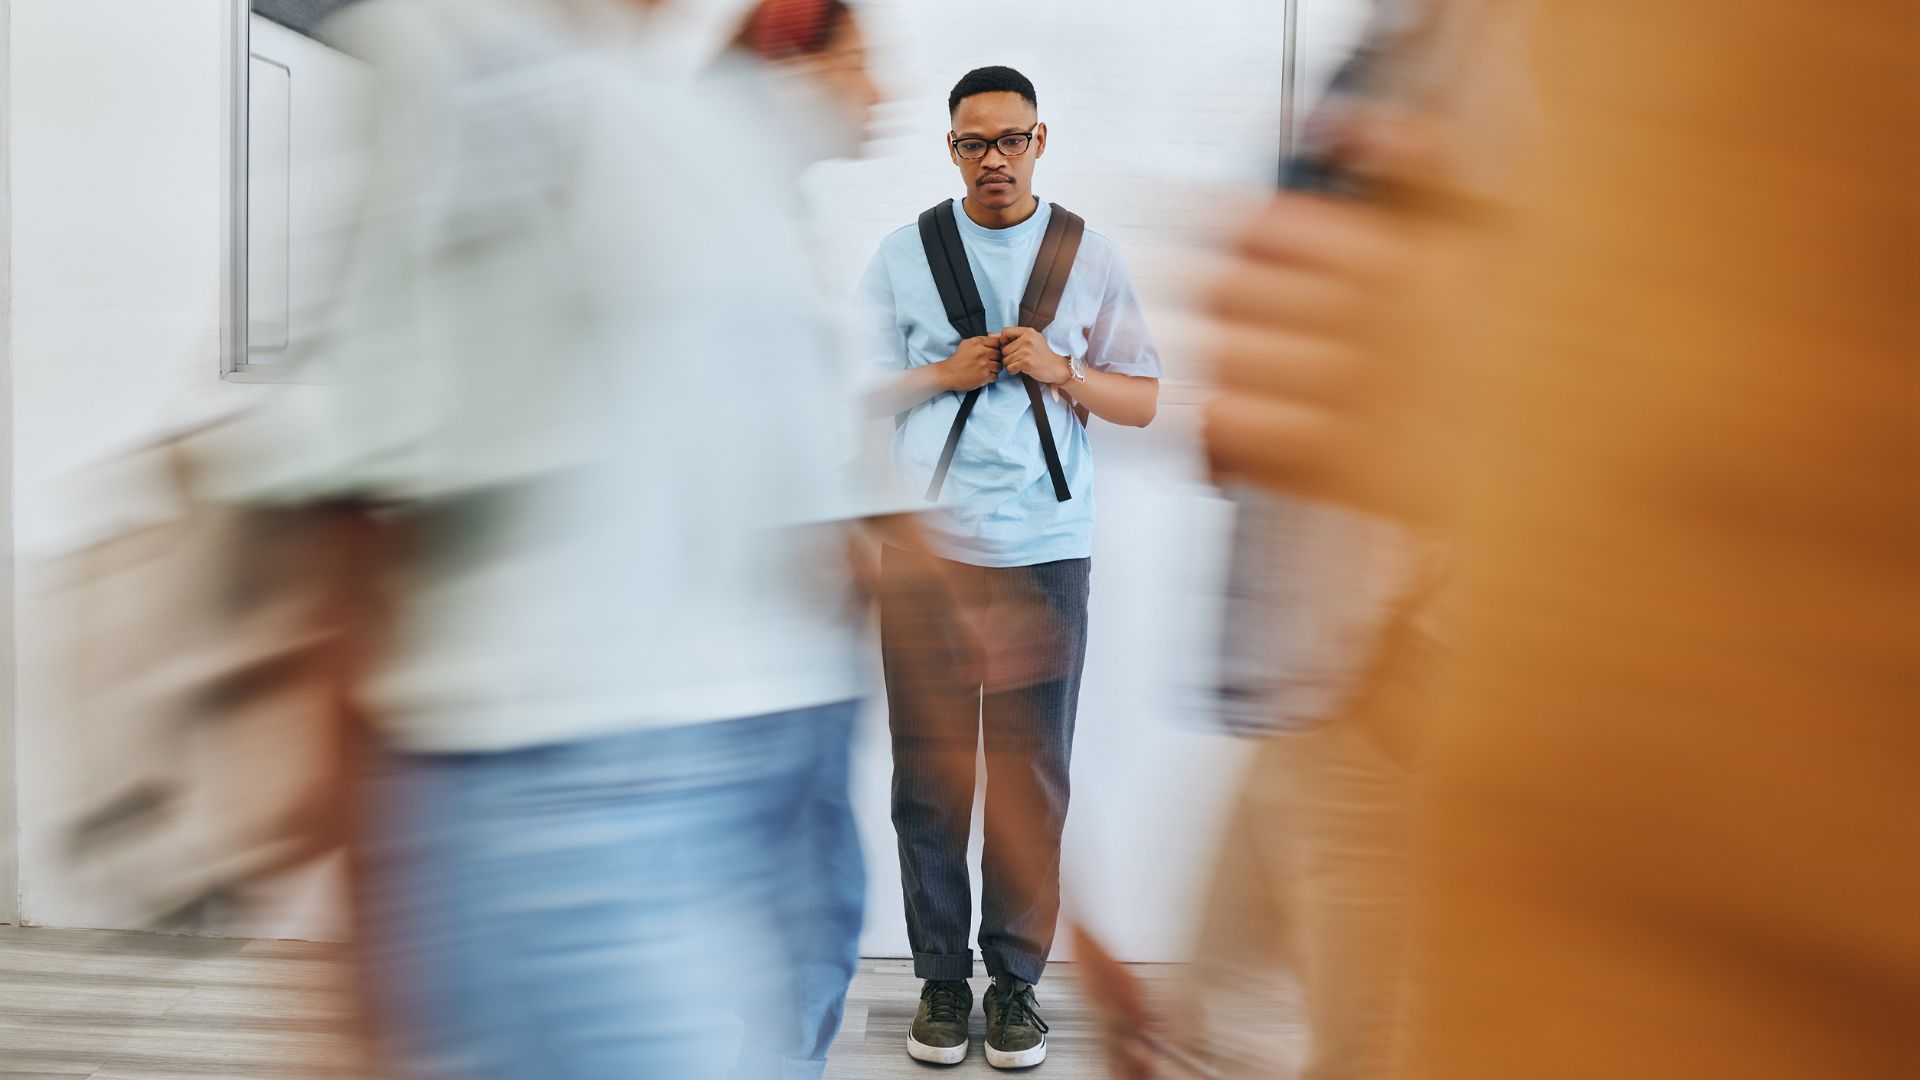 Young Black man with mental health challenges is walking down a hall in a blue shirt and jeans carrying a backpack while the people around him are blurred.